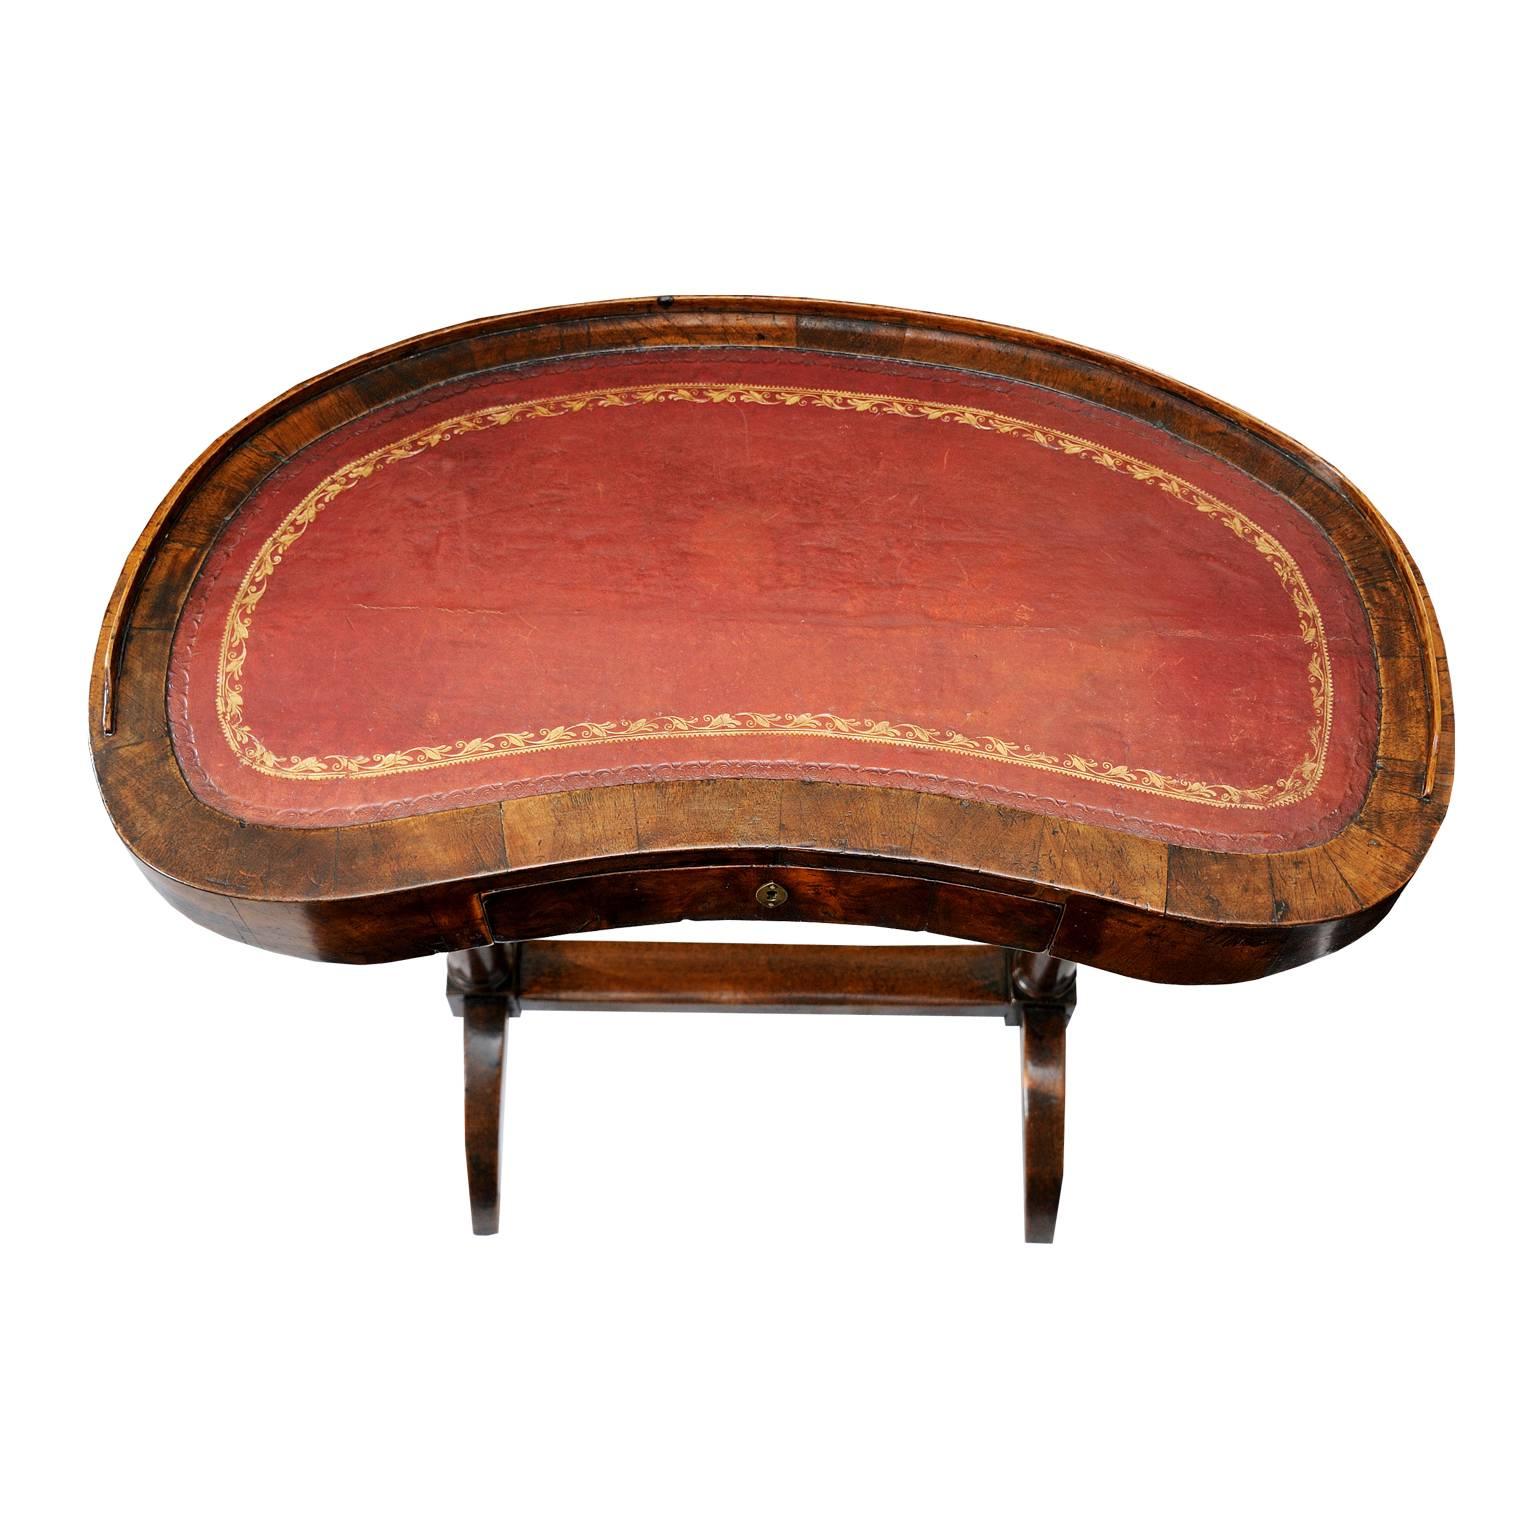 Empire French Walnut Kidney-Shaped Writing Desk, circa 1820 For Sale